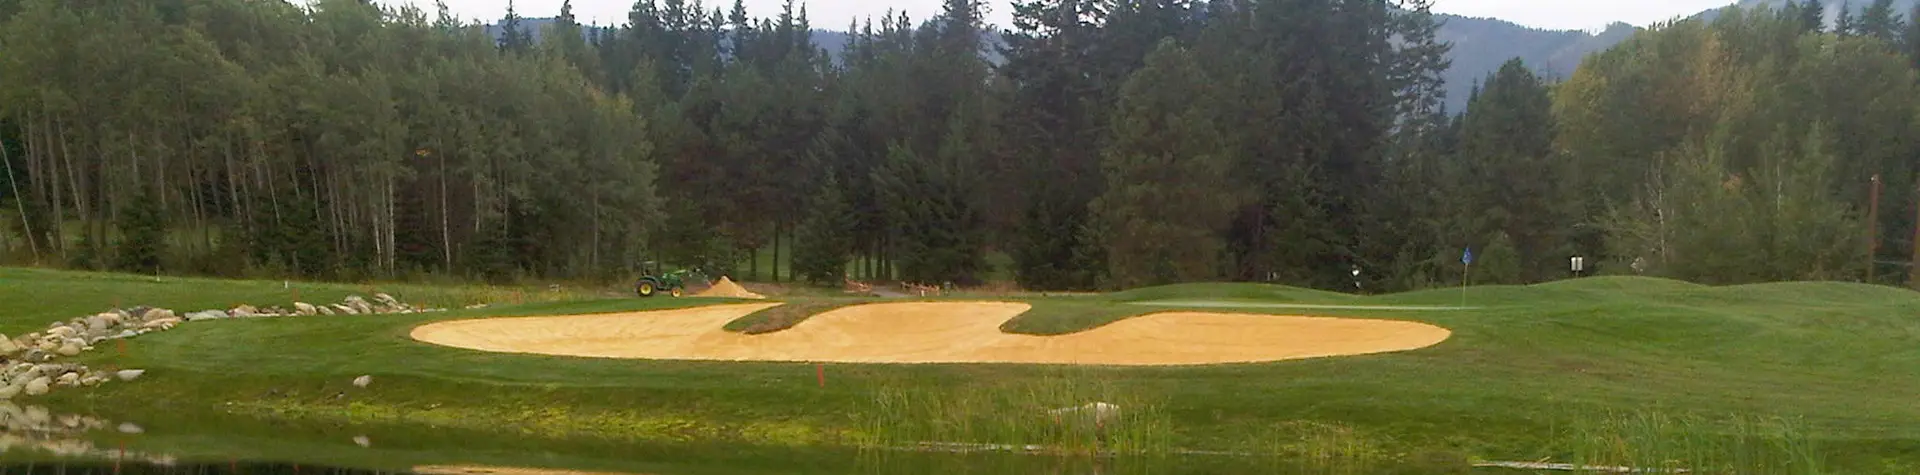 Image of a sand pit on a golf course